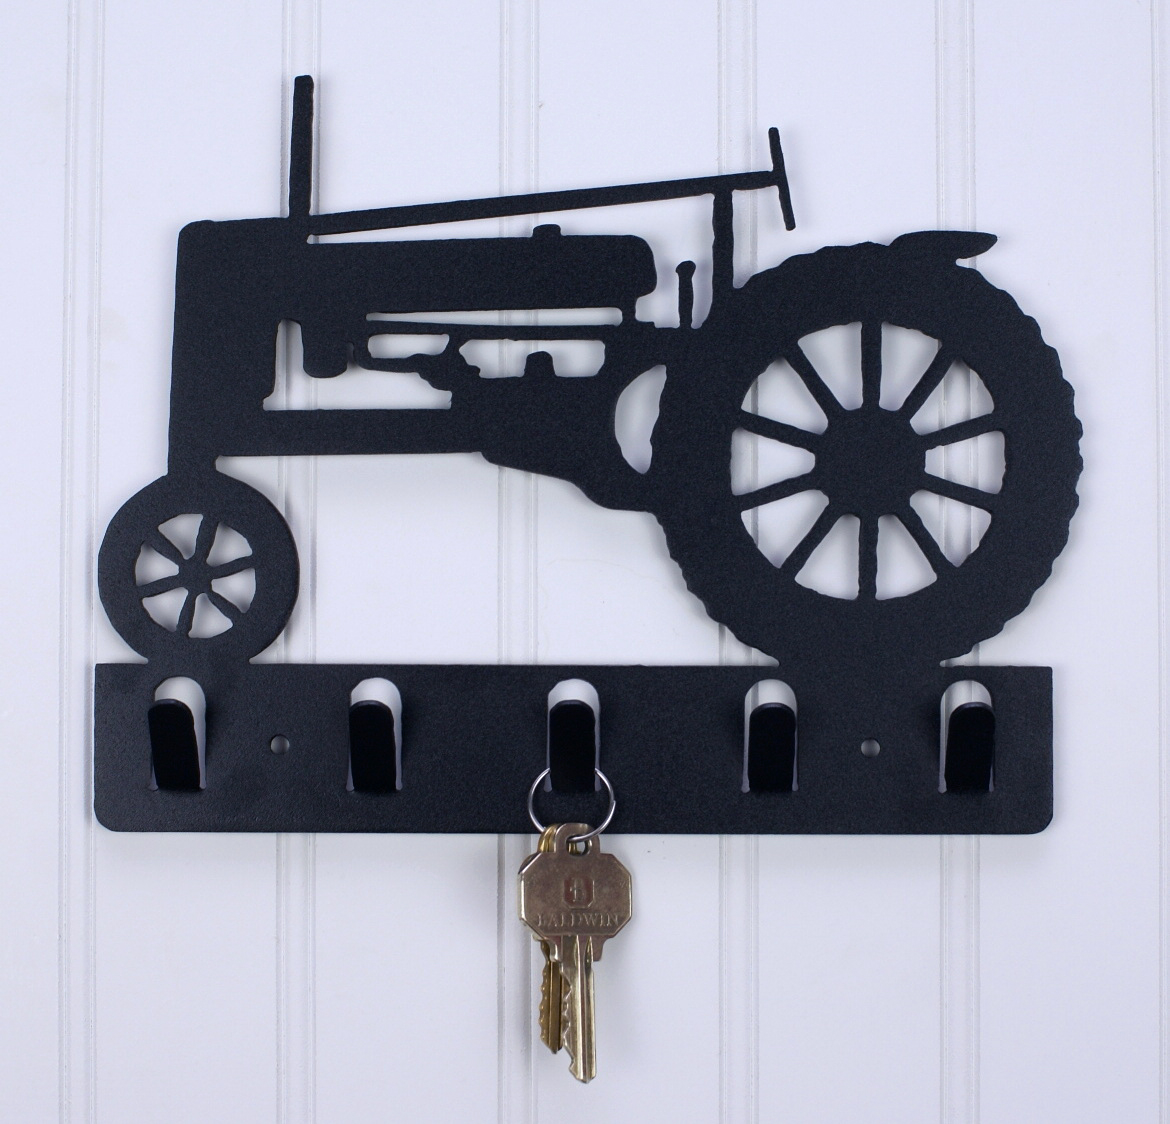  Key Hooks for Wall, Key Holder for Wall Decorative